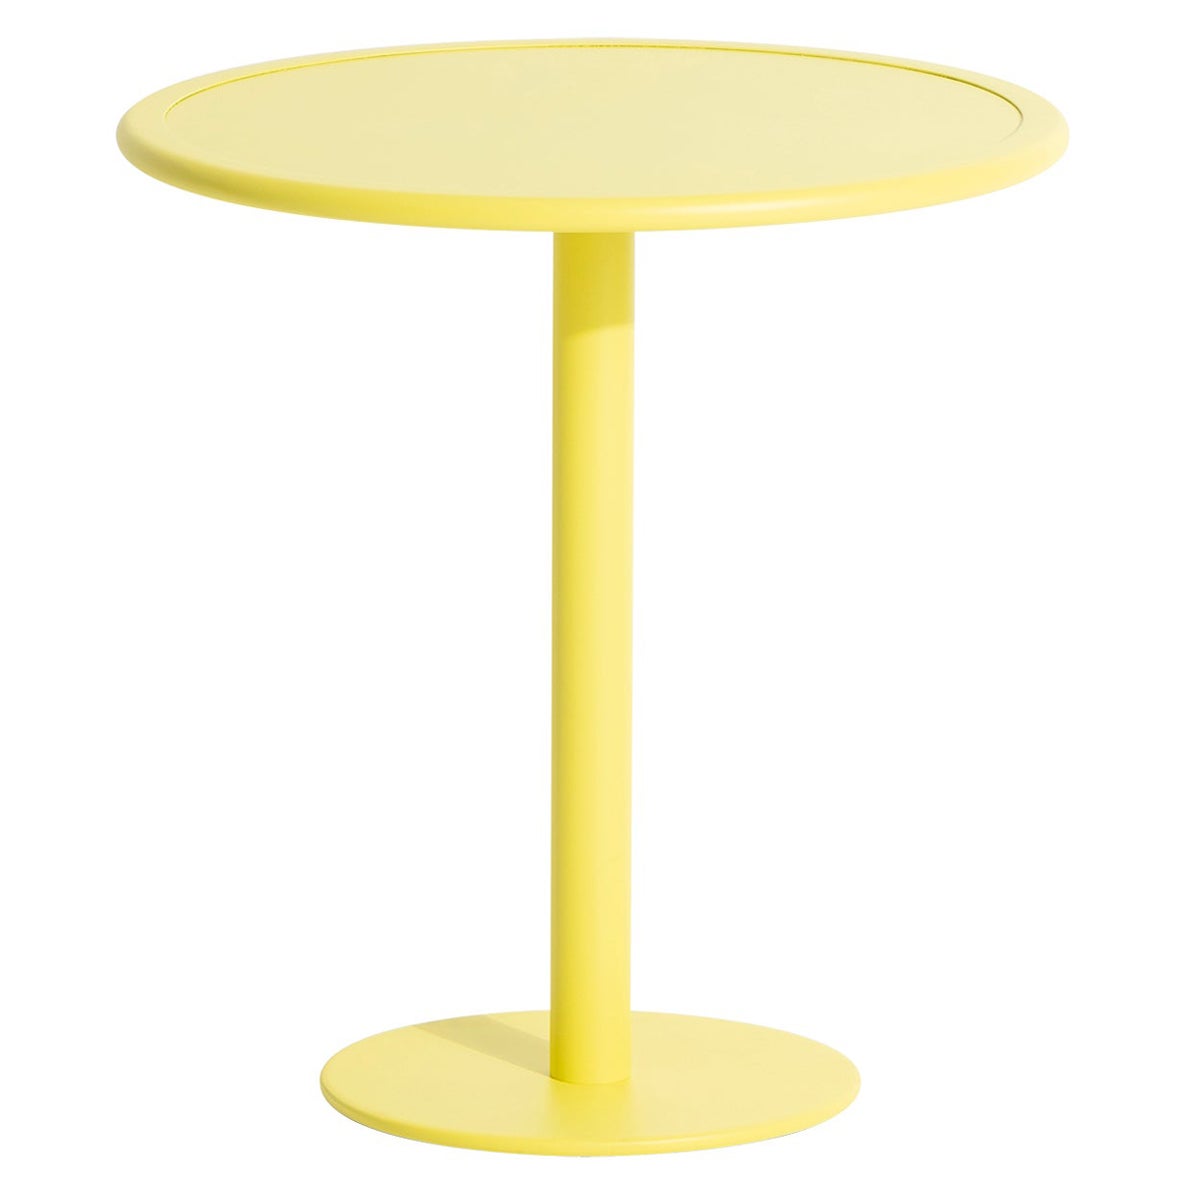 Petite Friture Week-End Bistro Round Dining Table in Yellow Aluminium, 2017